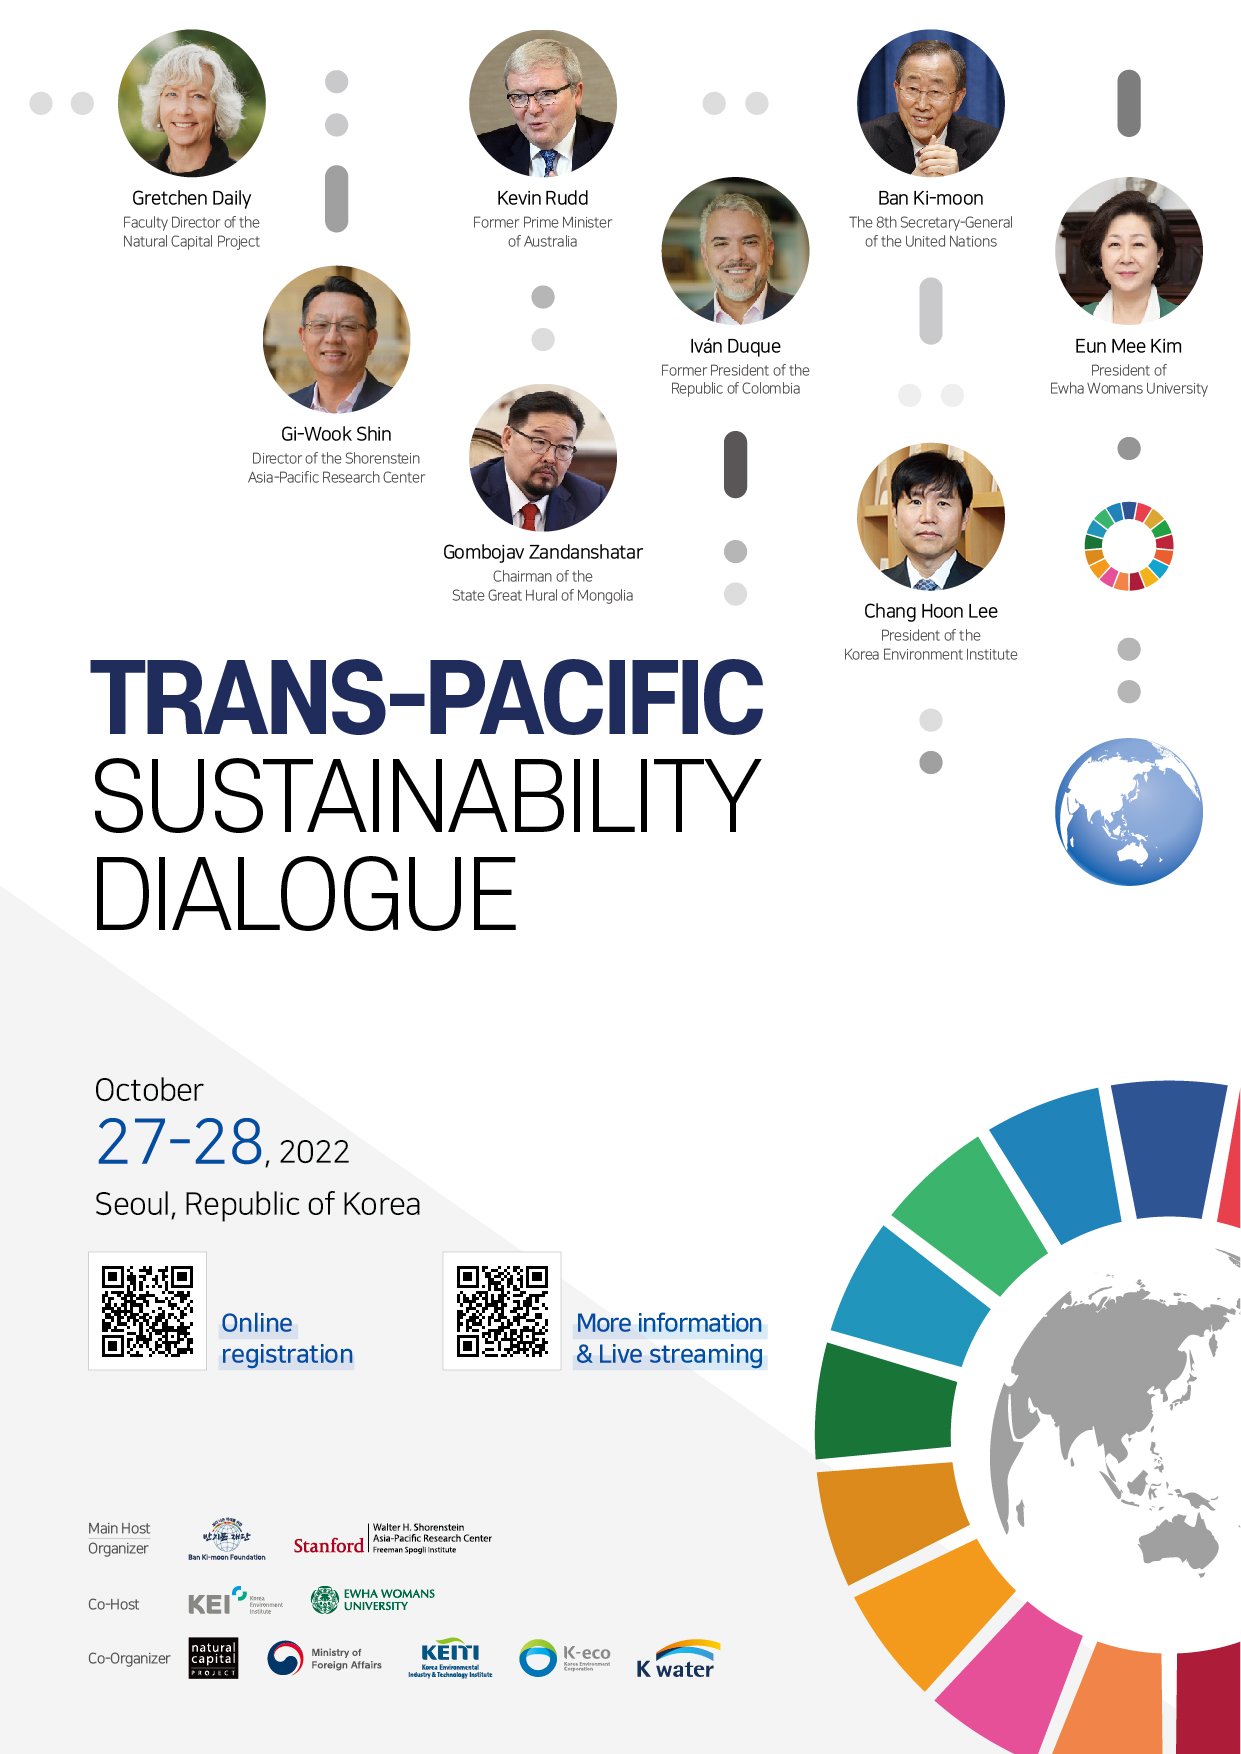 TRANS-PACIFIC SUSTAINABILITY DIALOGUE 개최